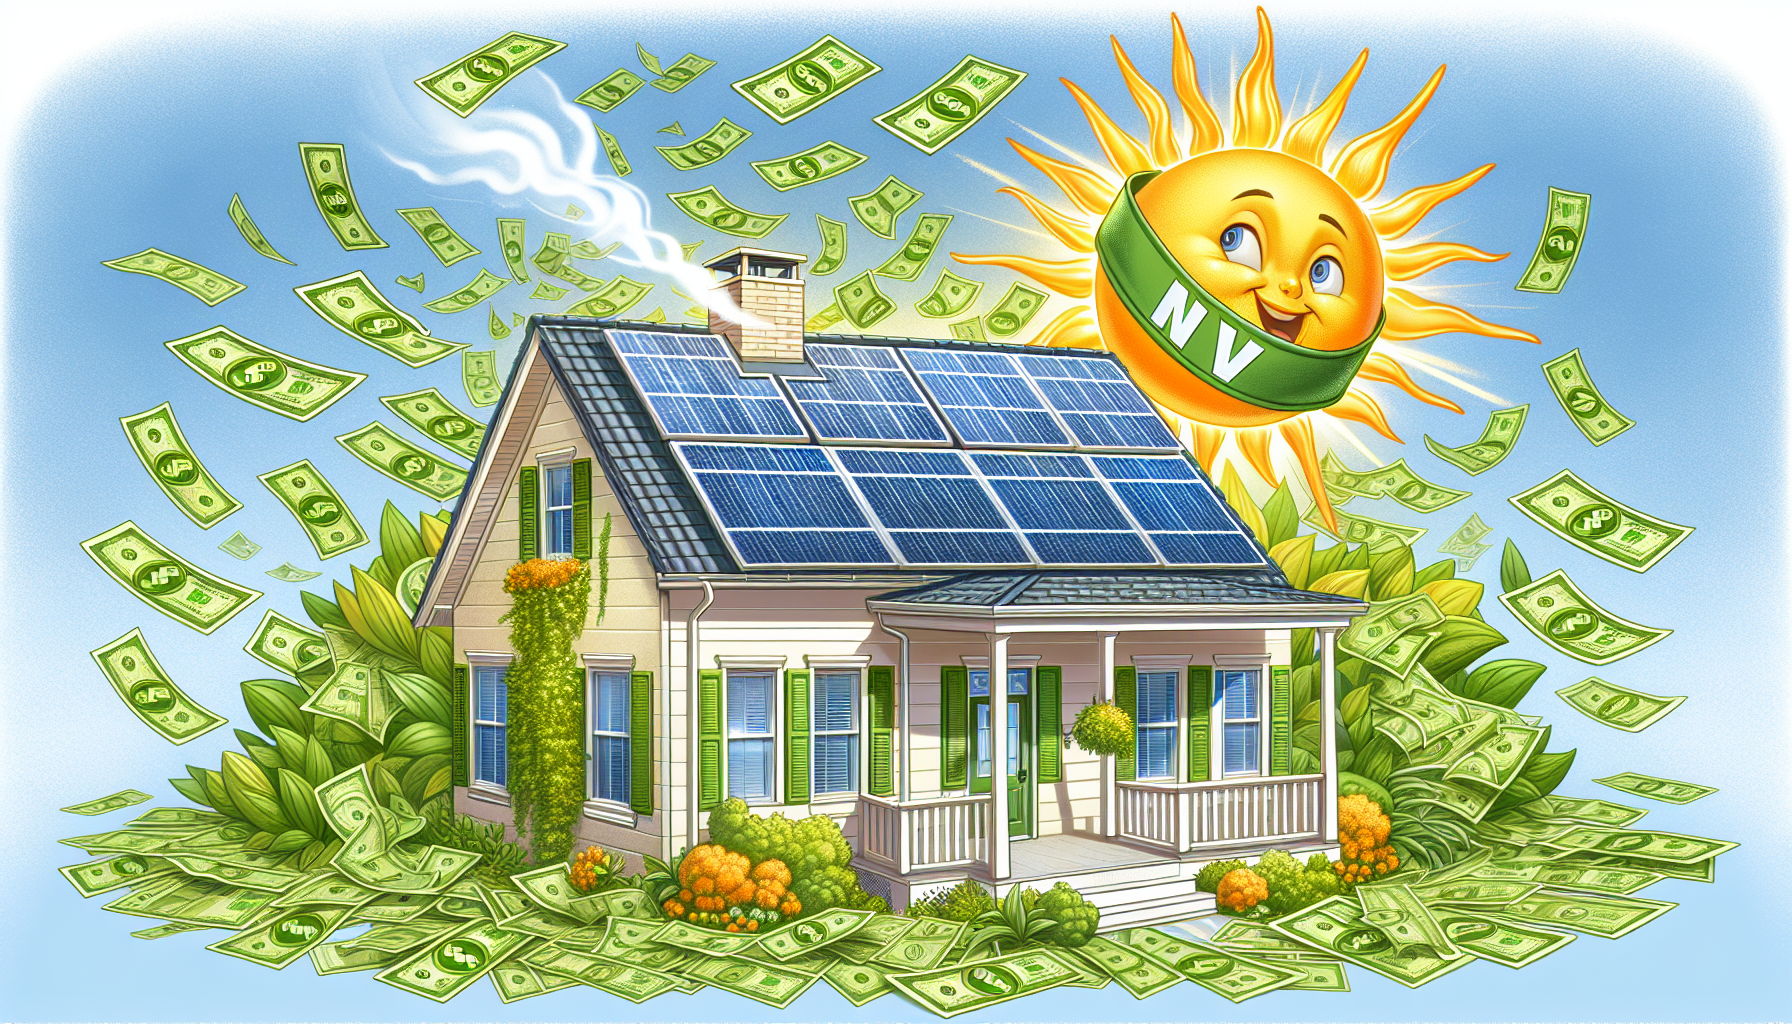 Illustration of federal solar tax credit and incentives